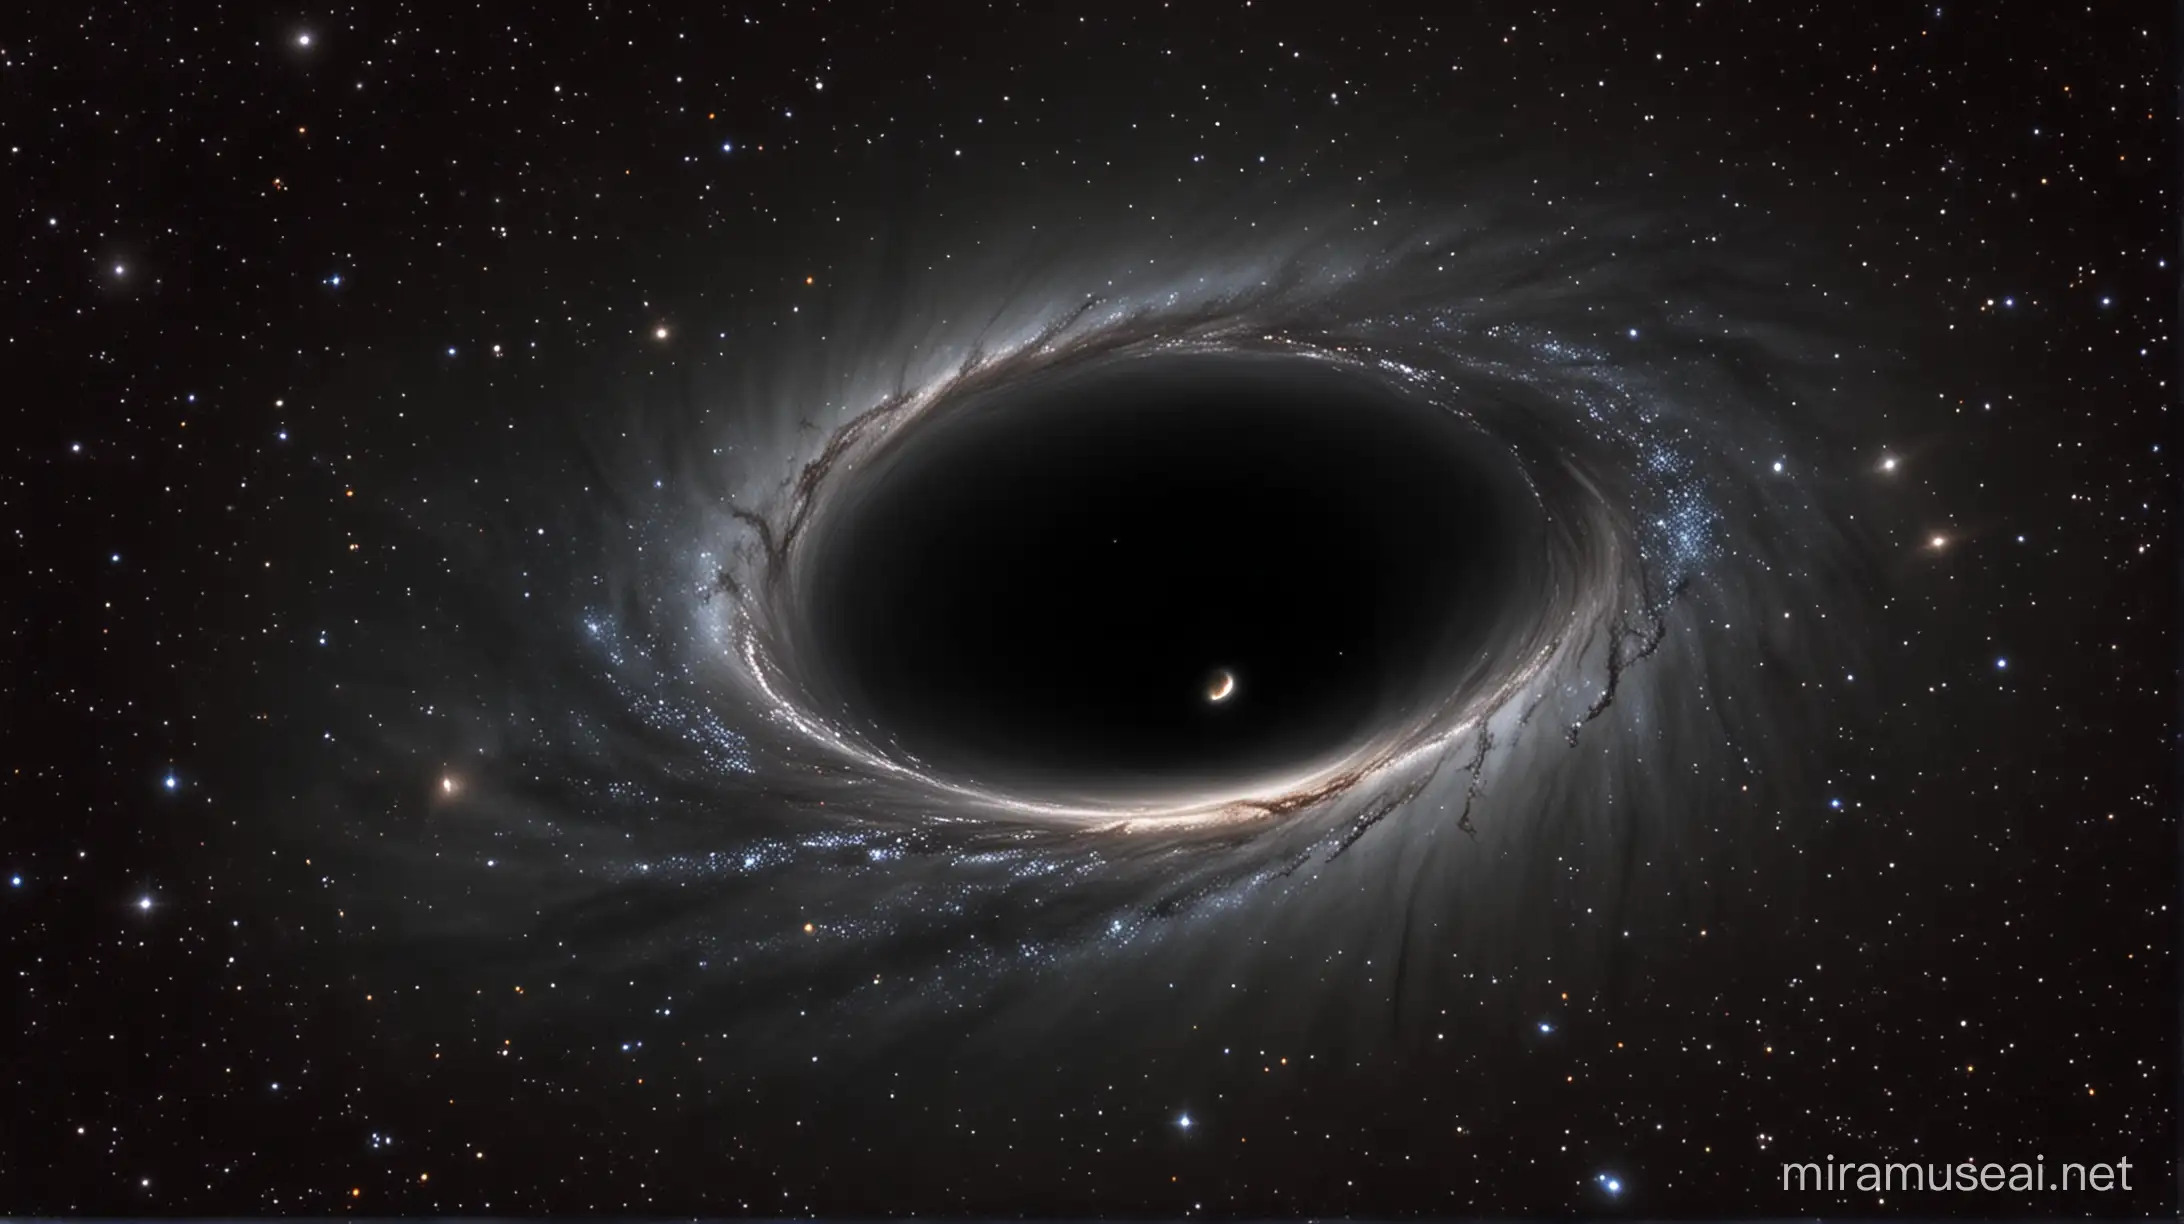 In the vast and boundless universe, black holes are quietly devouring the surrounding stars. These black holes, like monsters in the universe, greedily consume the stars that pass by them, even unable to escape their gravitational pull. Their appetites are so great that even the massive and highly luminous stars are not spared. Once captured by a black hole, the star will be torn apart and compressed, ultimately disappearing into the endless darkness of the black hole.